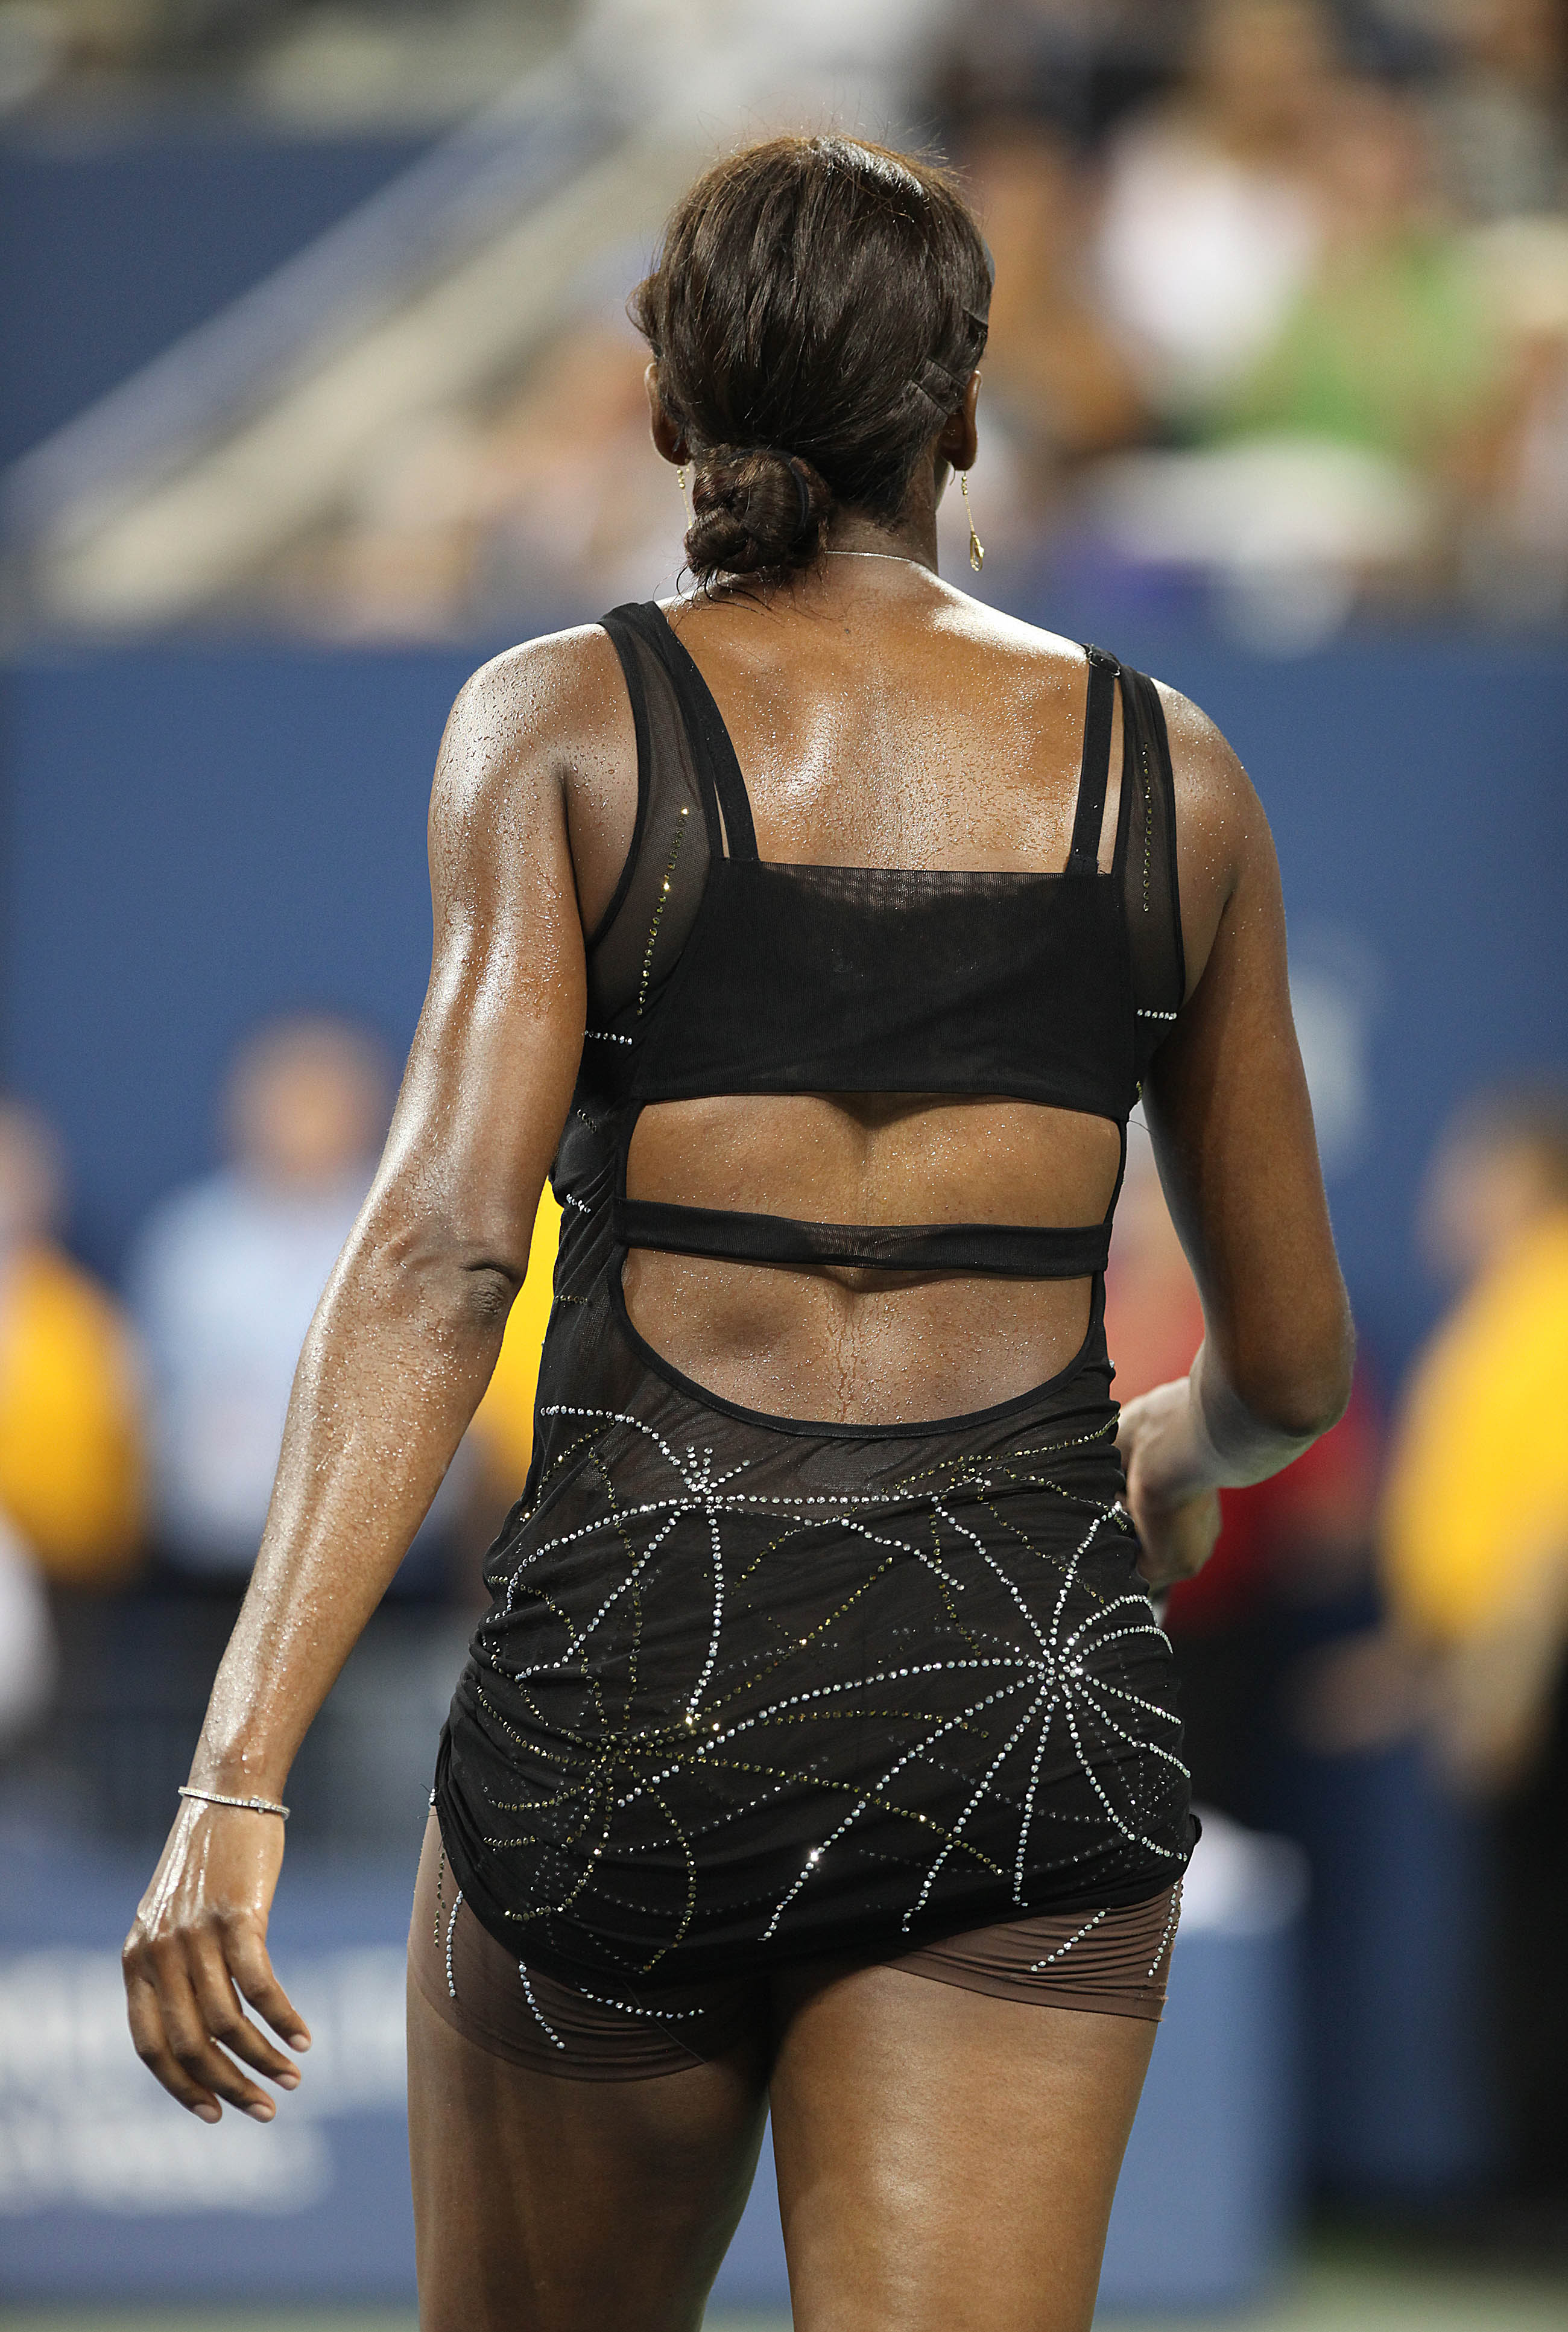 Venus Williams in action against Mandy Minella at the US Open